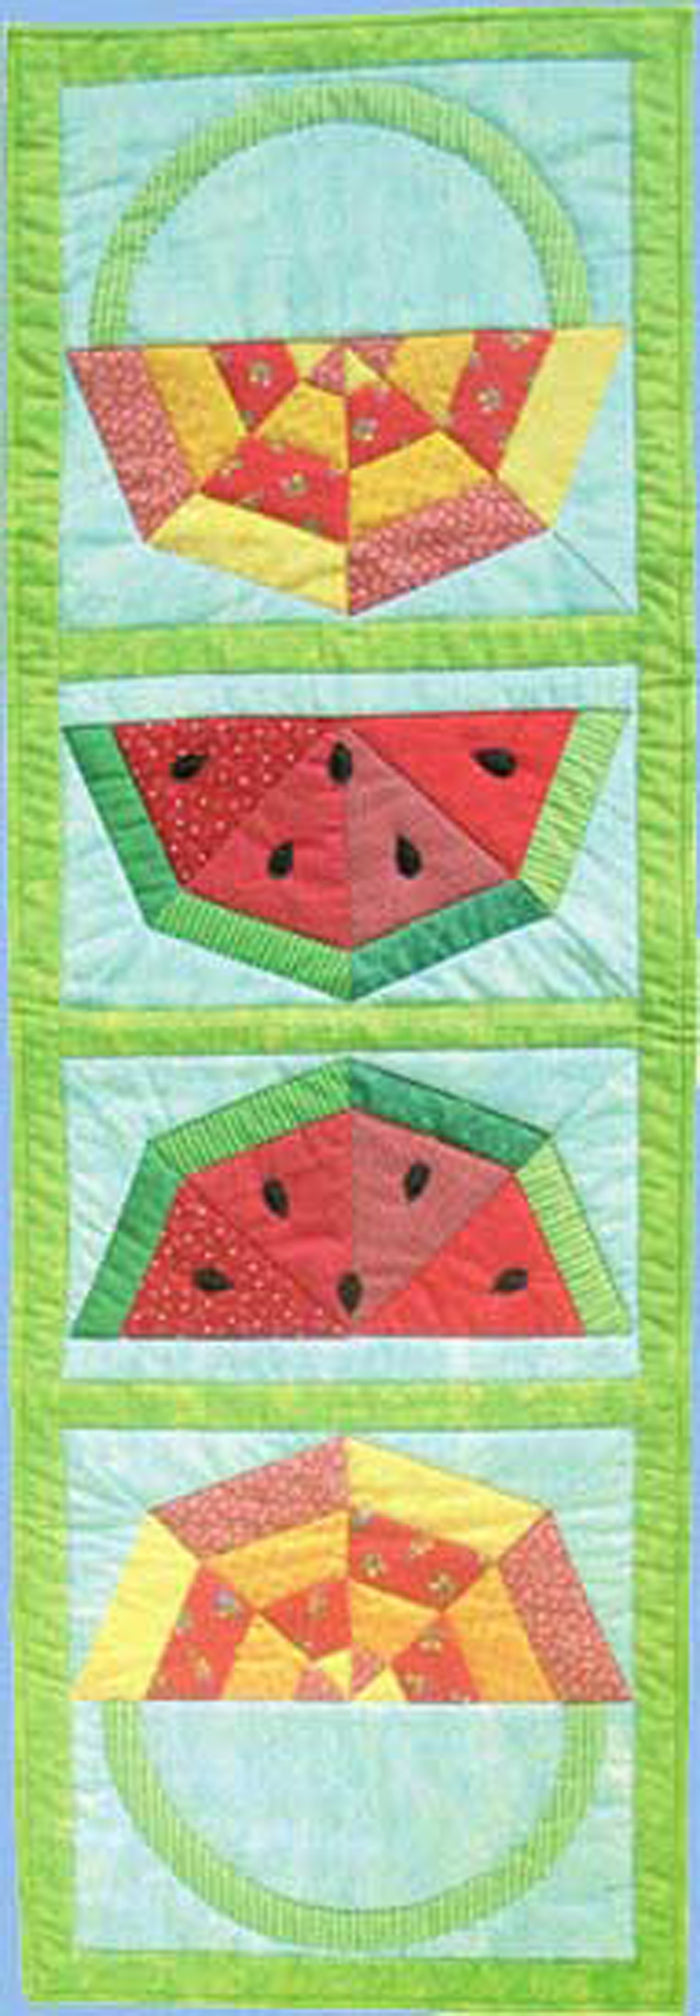 Picnic Table Runner AEQ-12e - Downloadable Pattern